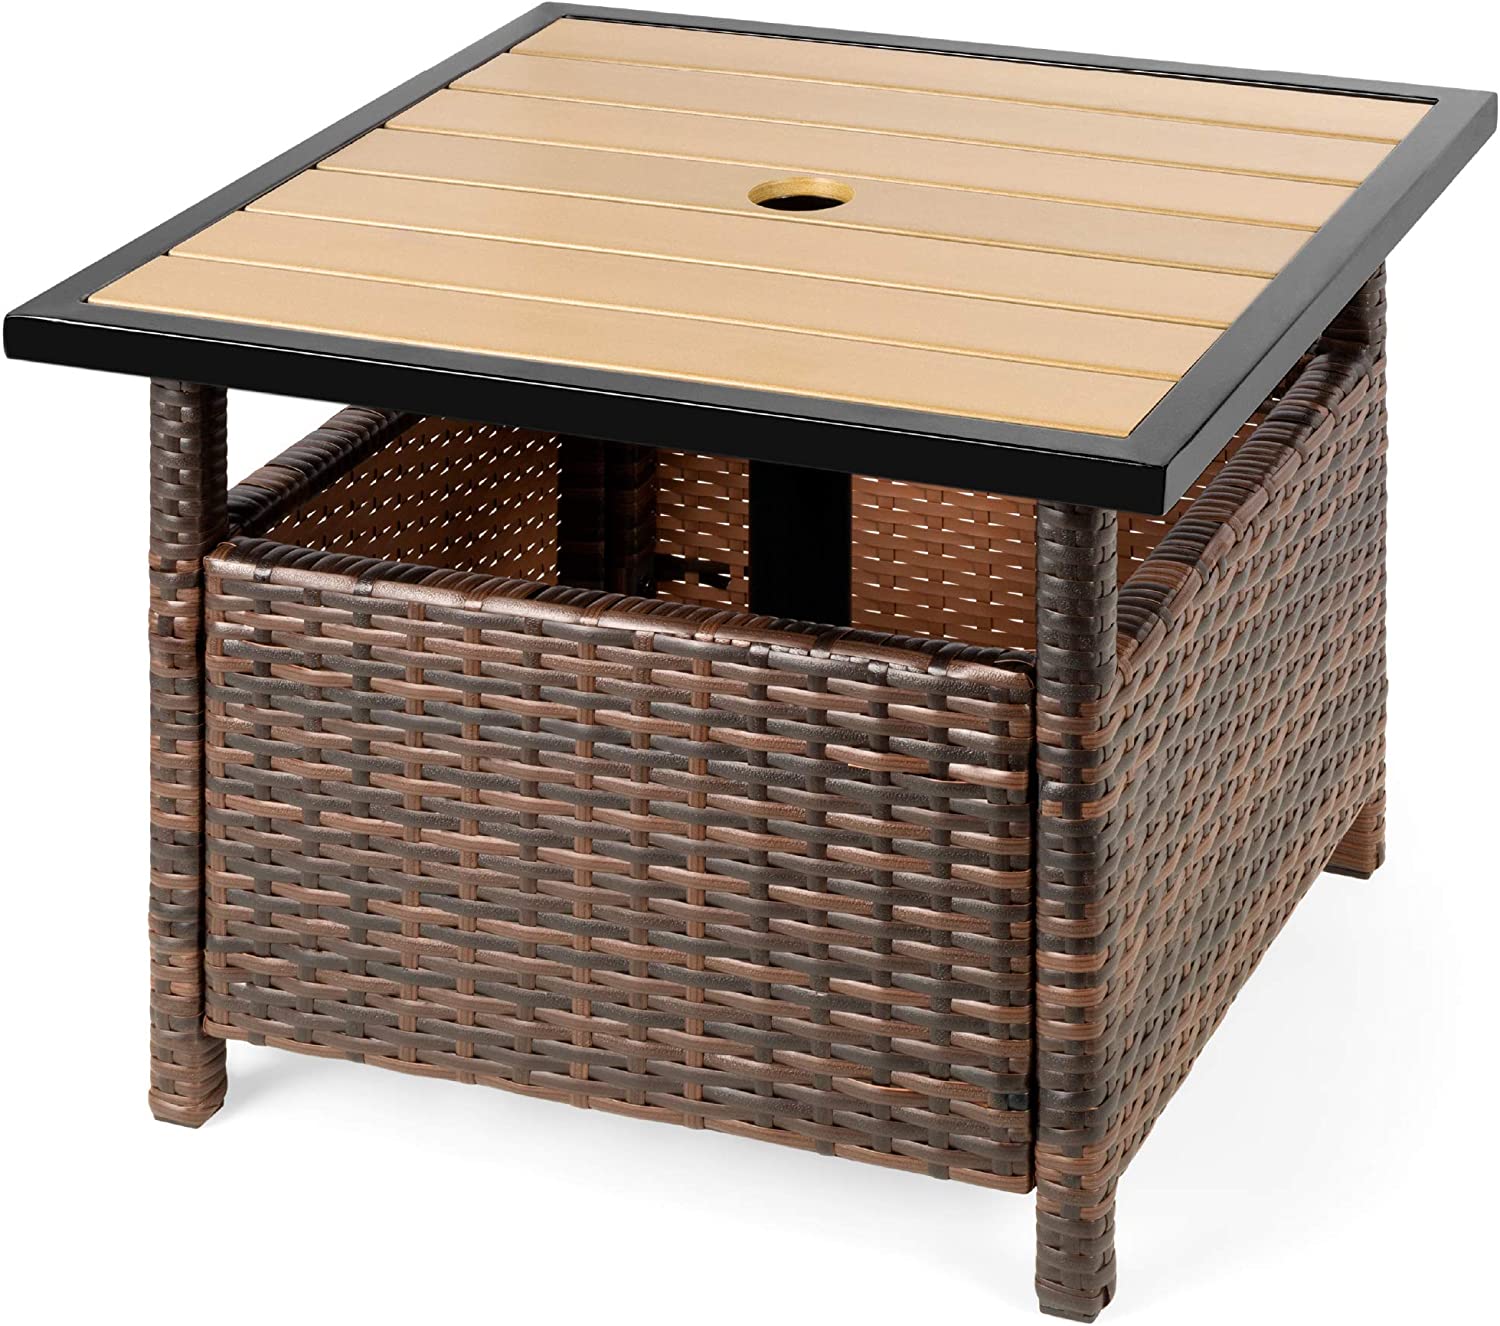 Wicker Side Table with Umbrella Hole, Square PE Rattan Outdoor End Table for Patio, Garden, Poolside, Deck w/UV-Resistant Frame, Storage Space, Brown - image 1 of 7